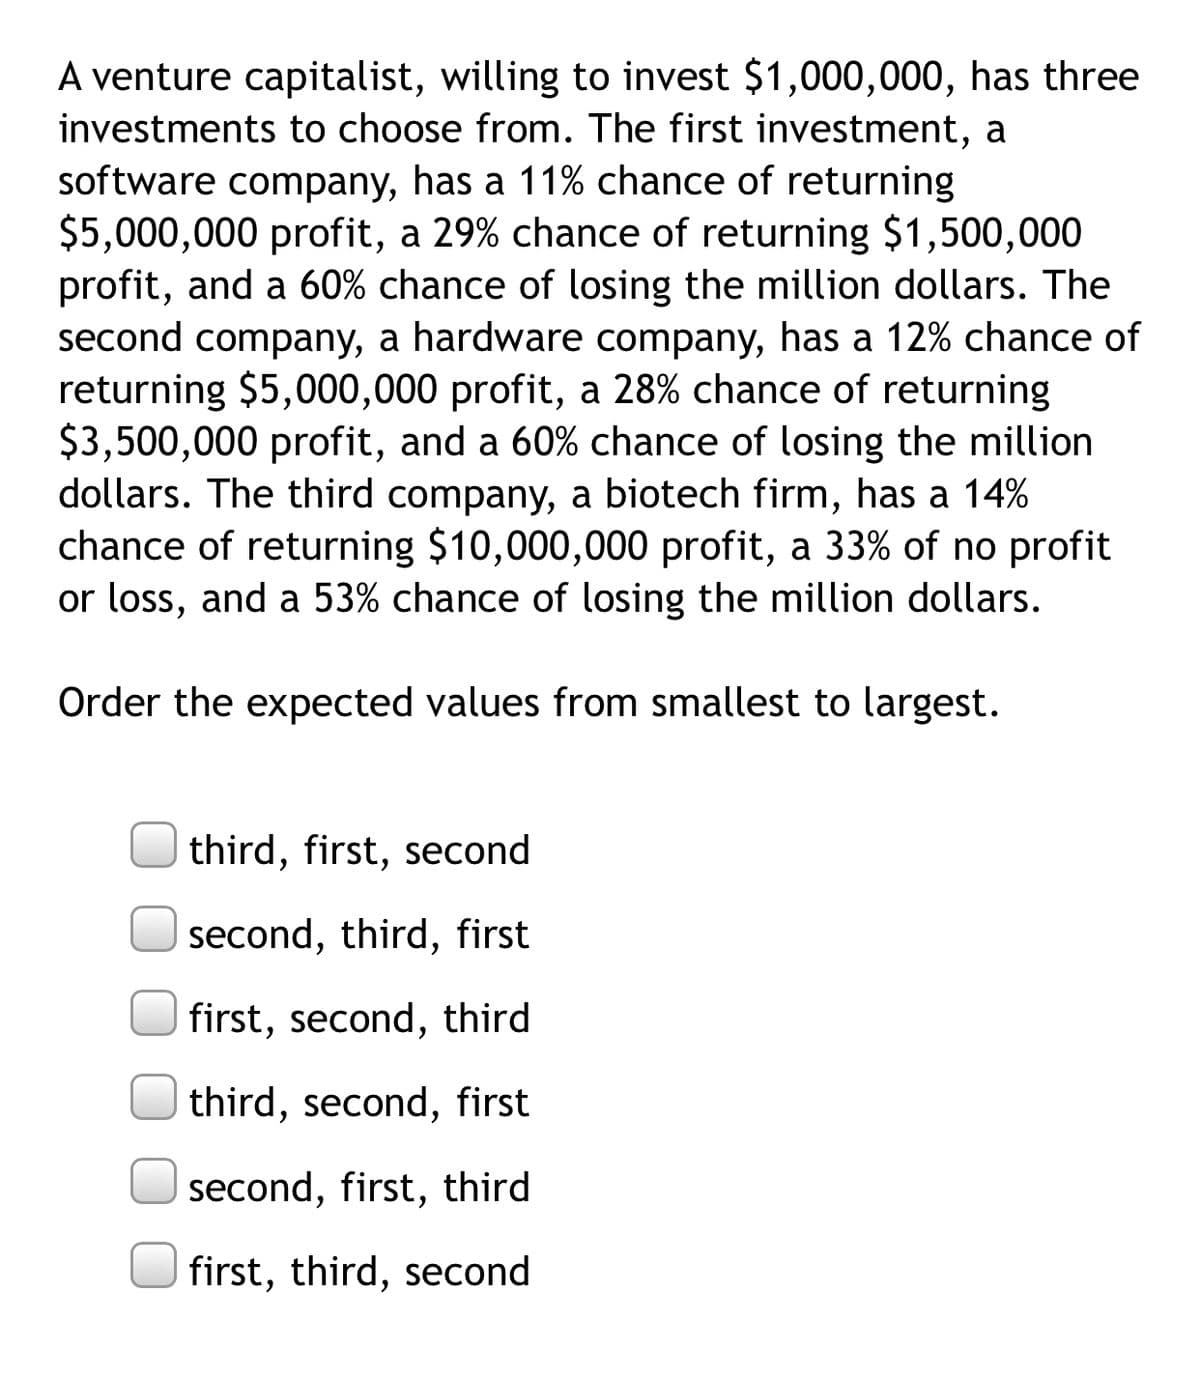 A venture capitalist, willing to invest $1,000,000, has three
investments to choose from. The first investment, a
software company, has a 11% chance of returning
$5,000,000 profit, a 29% chance of returning $1,500,000
profit, and a 60% chance of losing the million dollars. The
second company, a hardware company, has a 12% chance of
returning $5,000,000 profit, a 28% chance of returning
$3,500,000 profit, and a 60% chance of losing the million
dollars. The third company, a biotech firm, has a 14%
chance of returning $10,000,000 profit, a 33% of no profit
or loss, and a 53% chance of losing the million dollars.
Order the expected values from smallest to largest.
third, first, second
second, third, first
first, second, third
third, second, first
second, first, third
first, third, second
